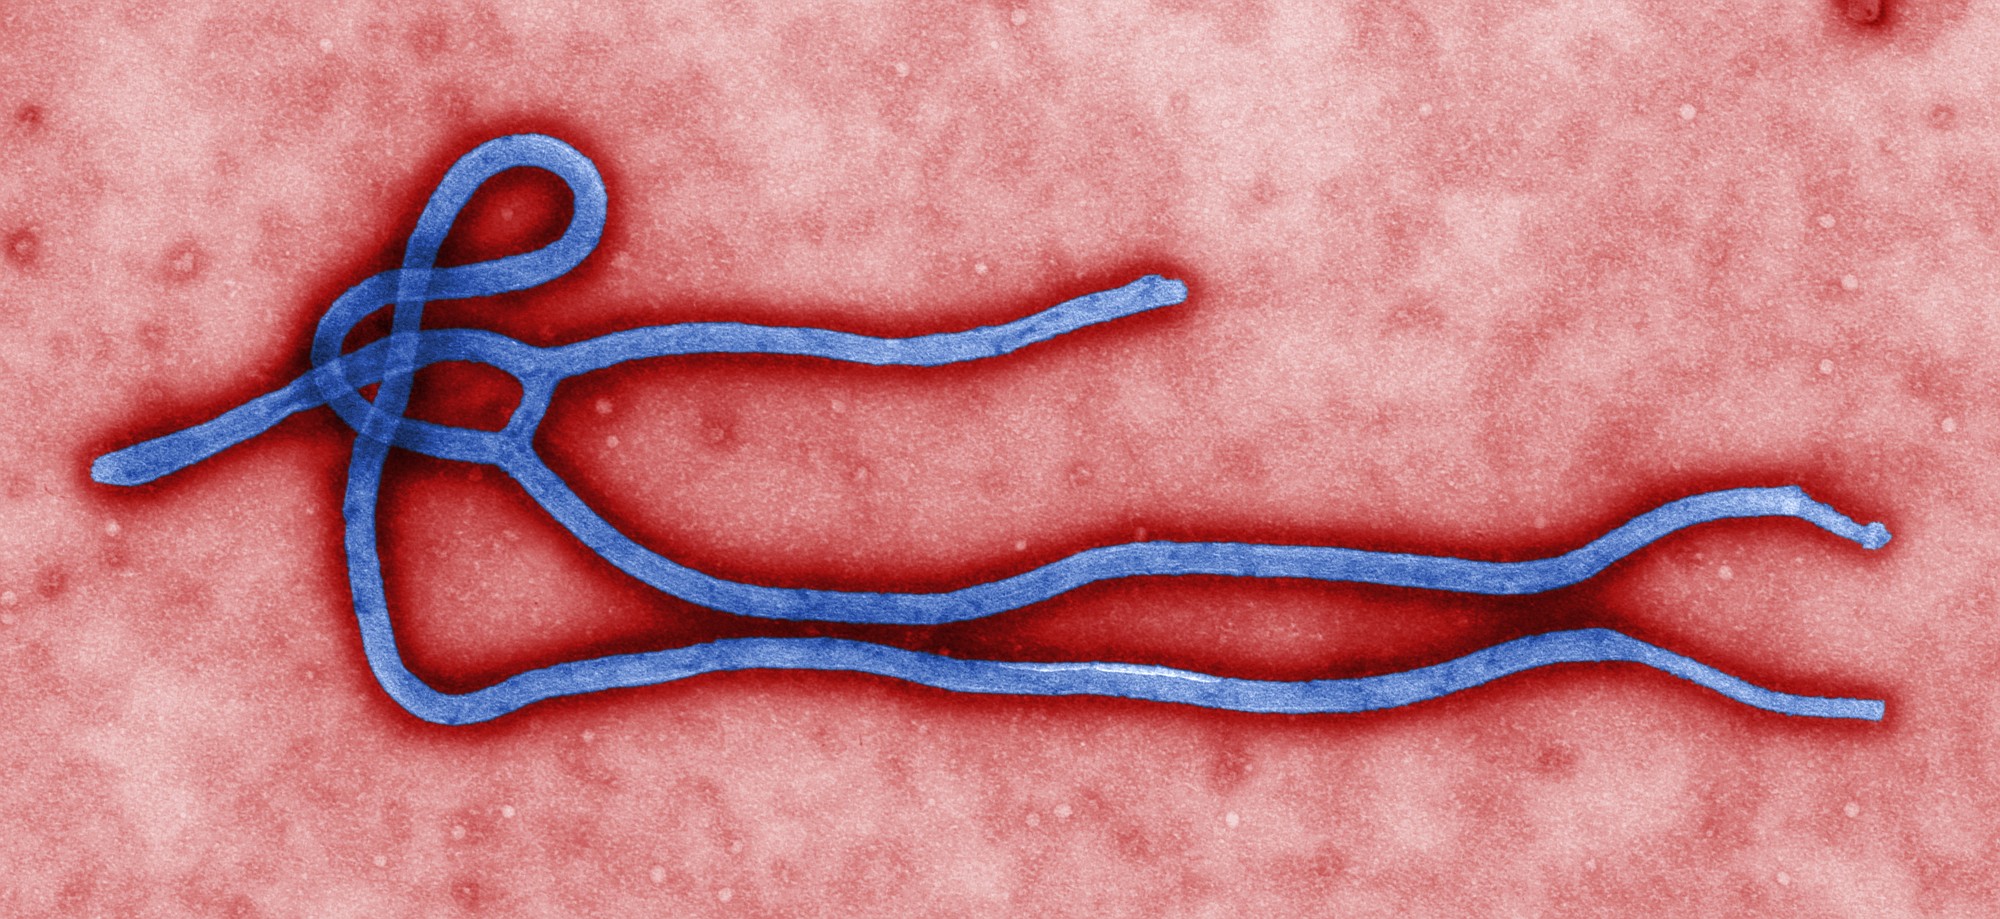 This undated file image made available by the Centers for Disease Control shows the Ebola virus. In a second, smaller Ebola outbreak, at least 69 people, including eight health workers, are believed to have been infected according to a study that was led by the World Health Organization and researchers from France and Canada and published online Wednesday by the New England Journal of Medicine.